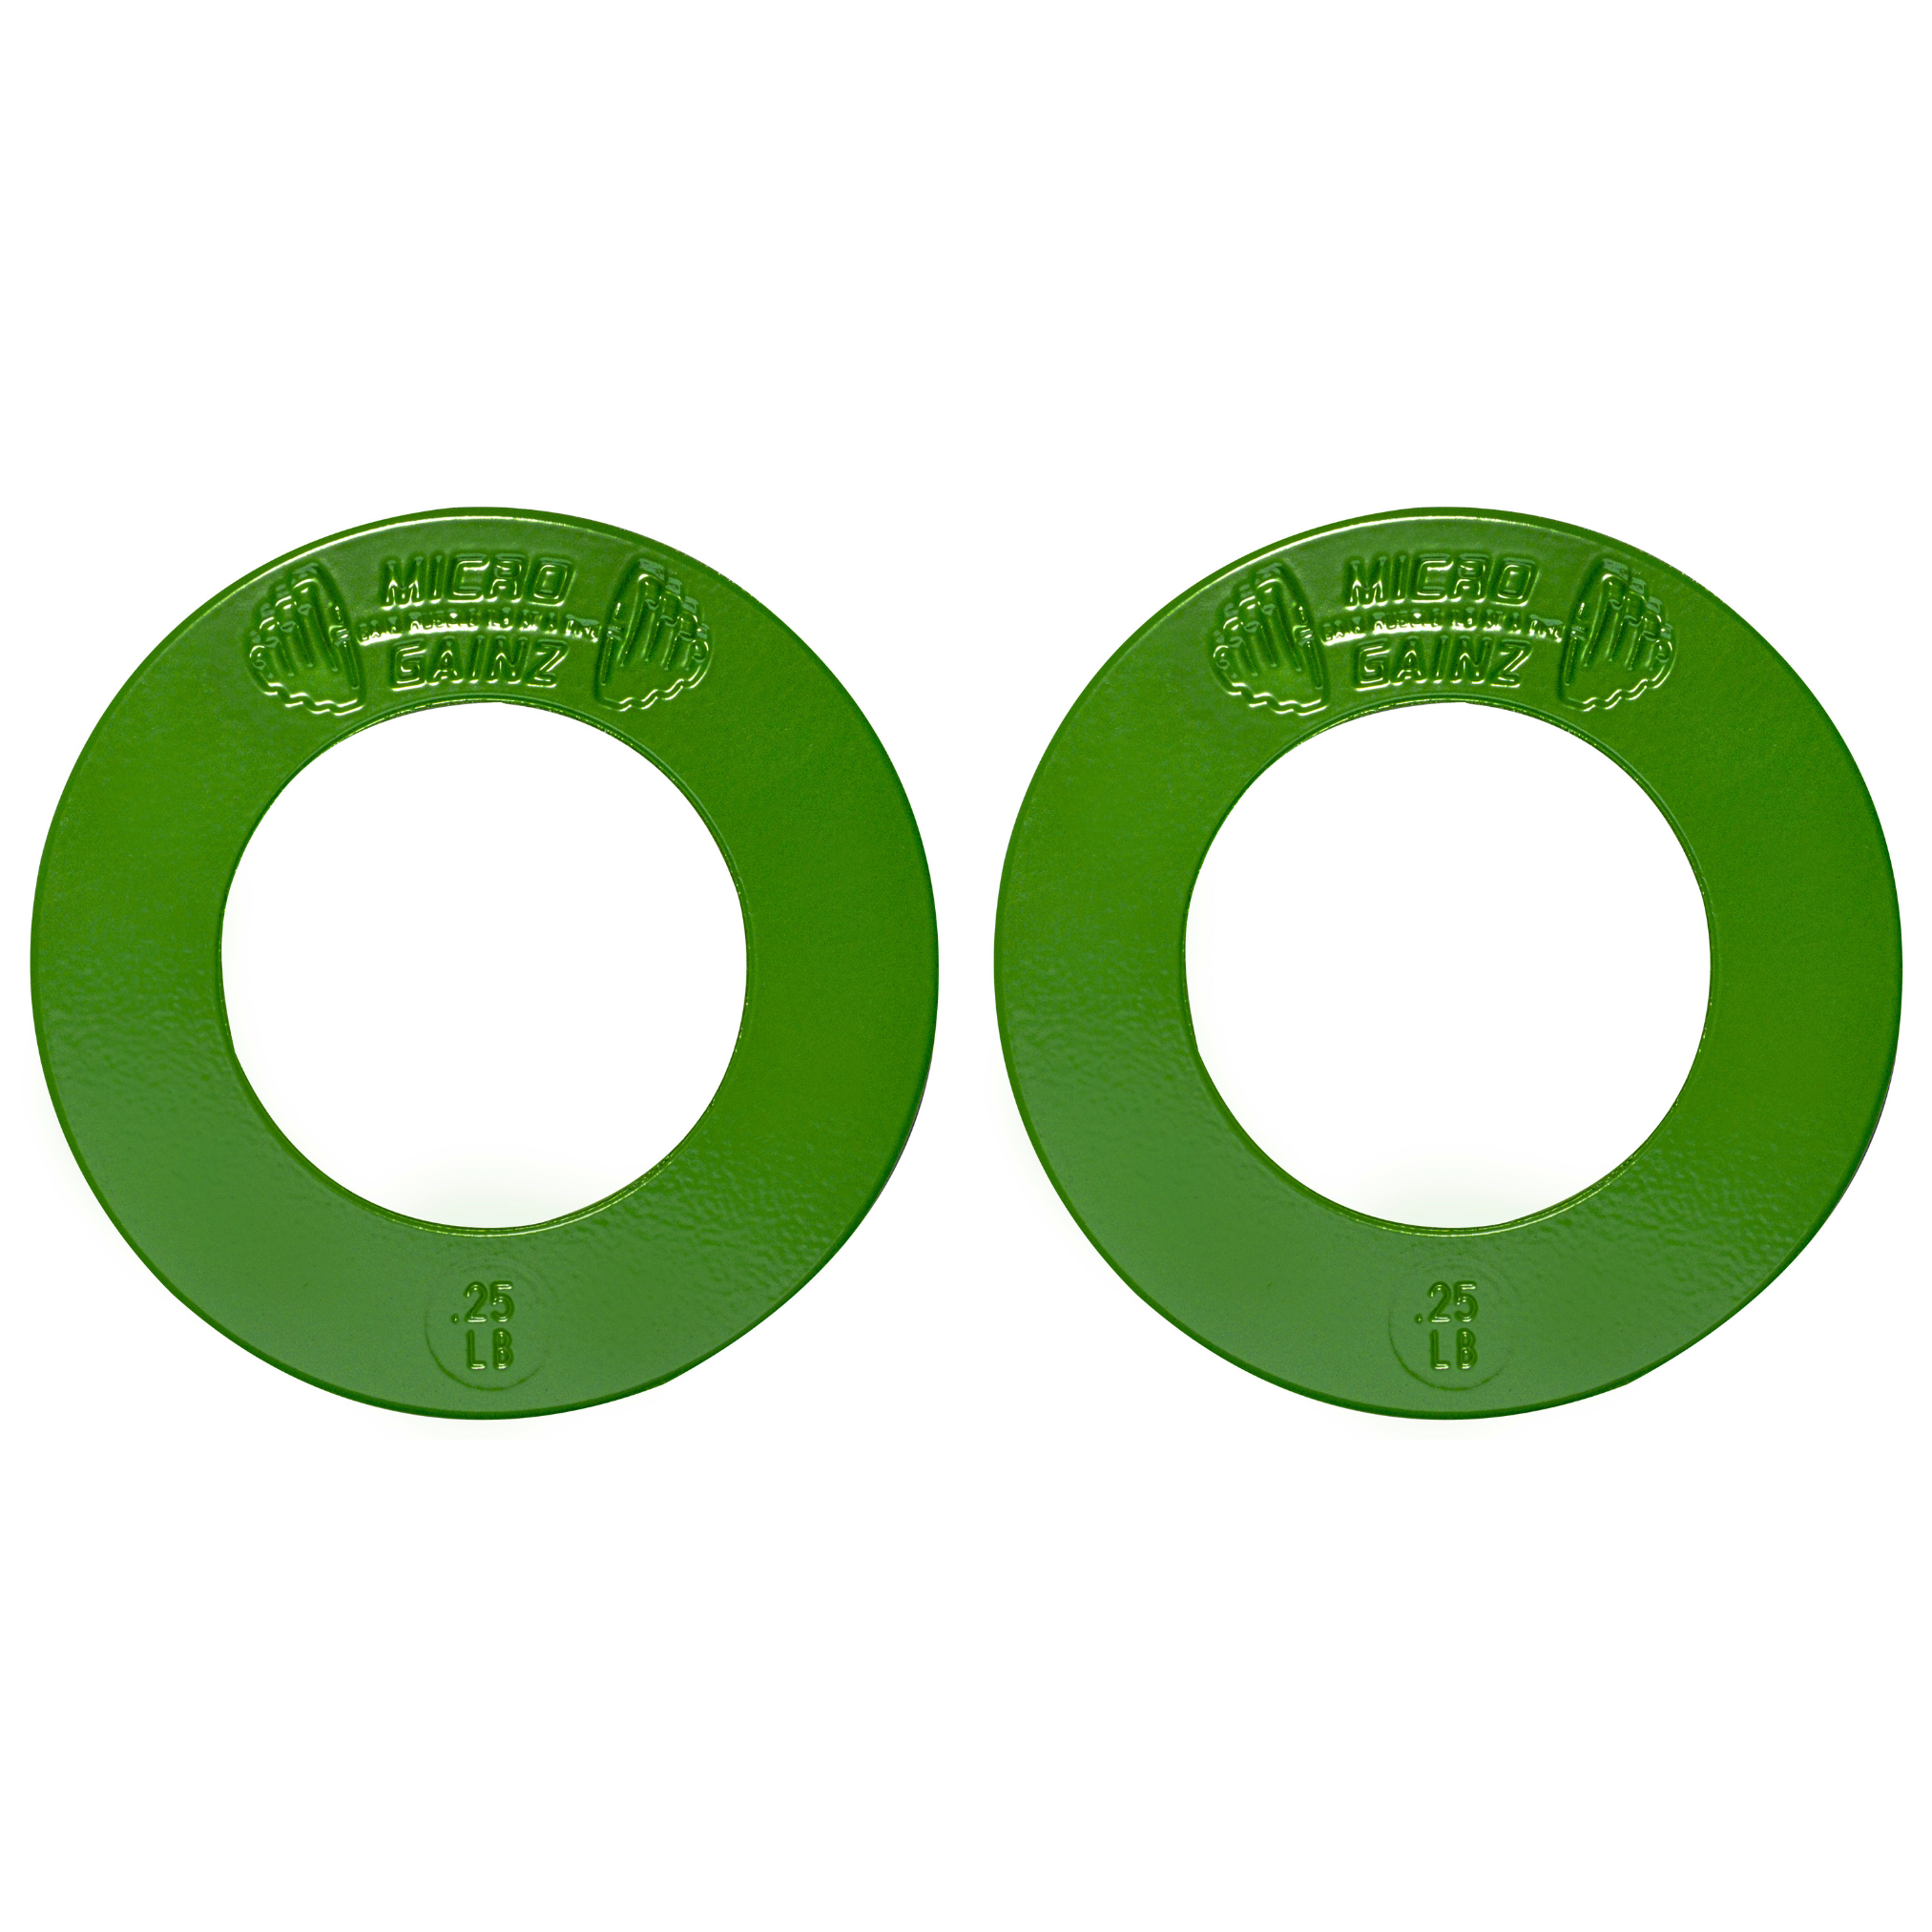 Micro Gainz Olympic Size Fractional Weight Plates Pair of Green .25LB Plates